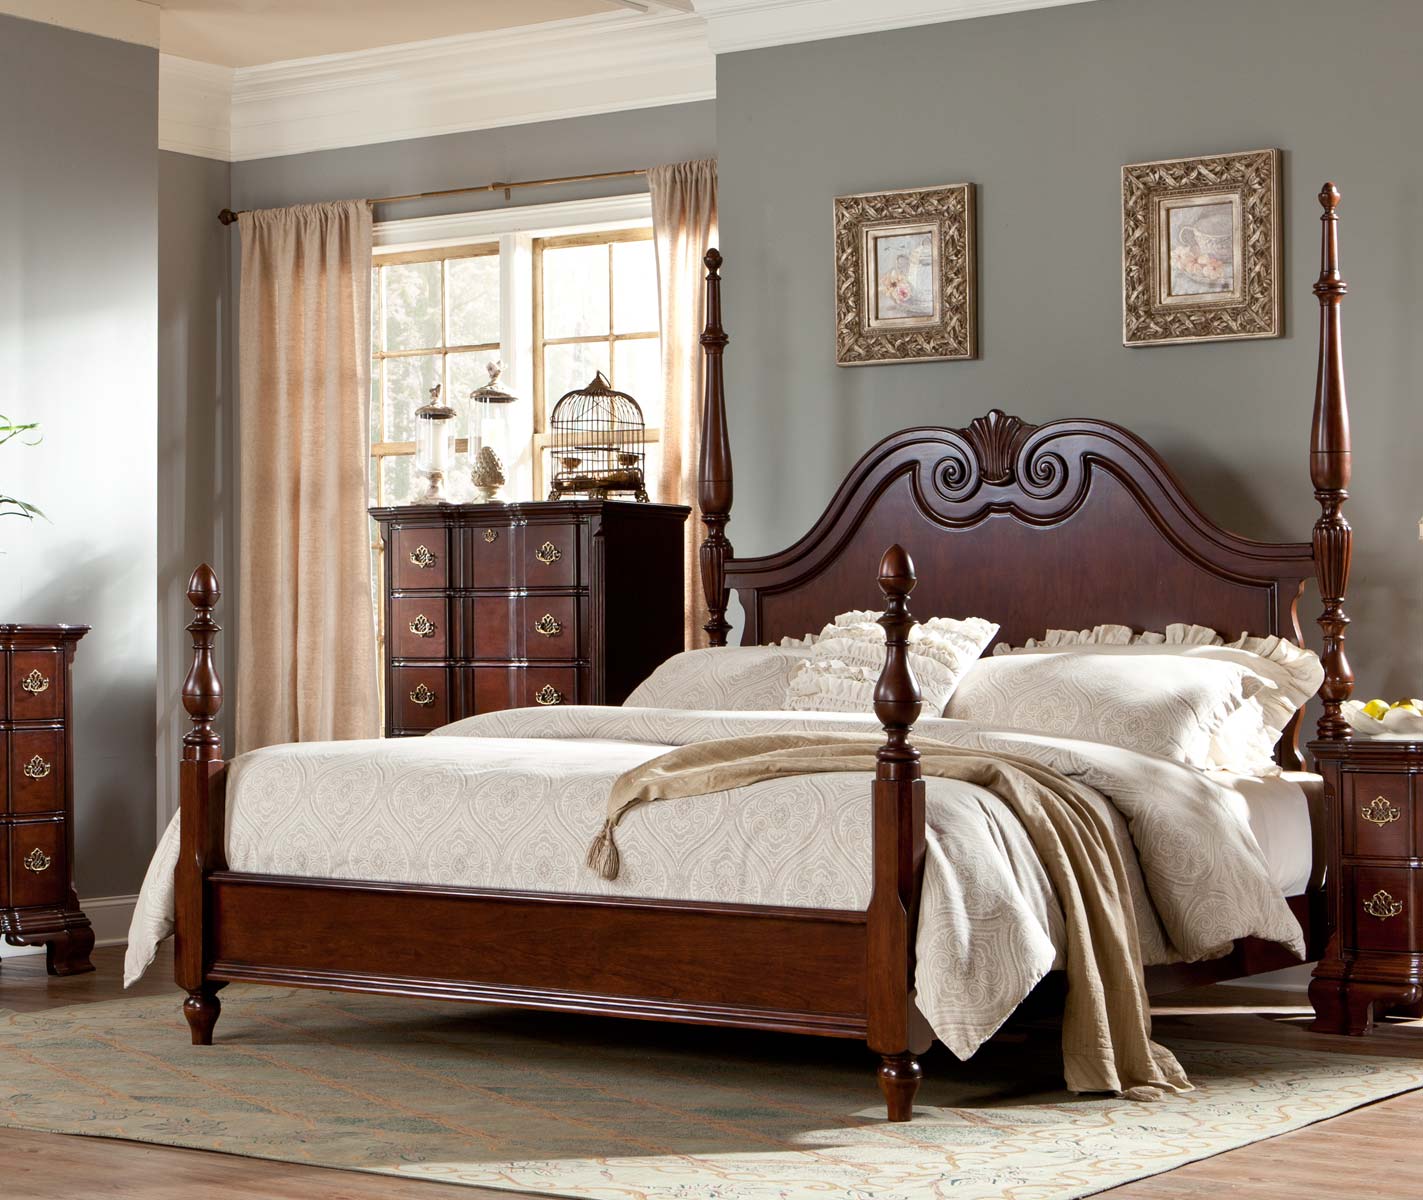 Homelegance Guilford Poster Bed - Brown Cherry